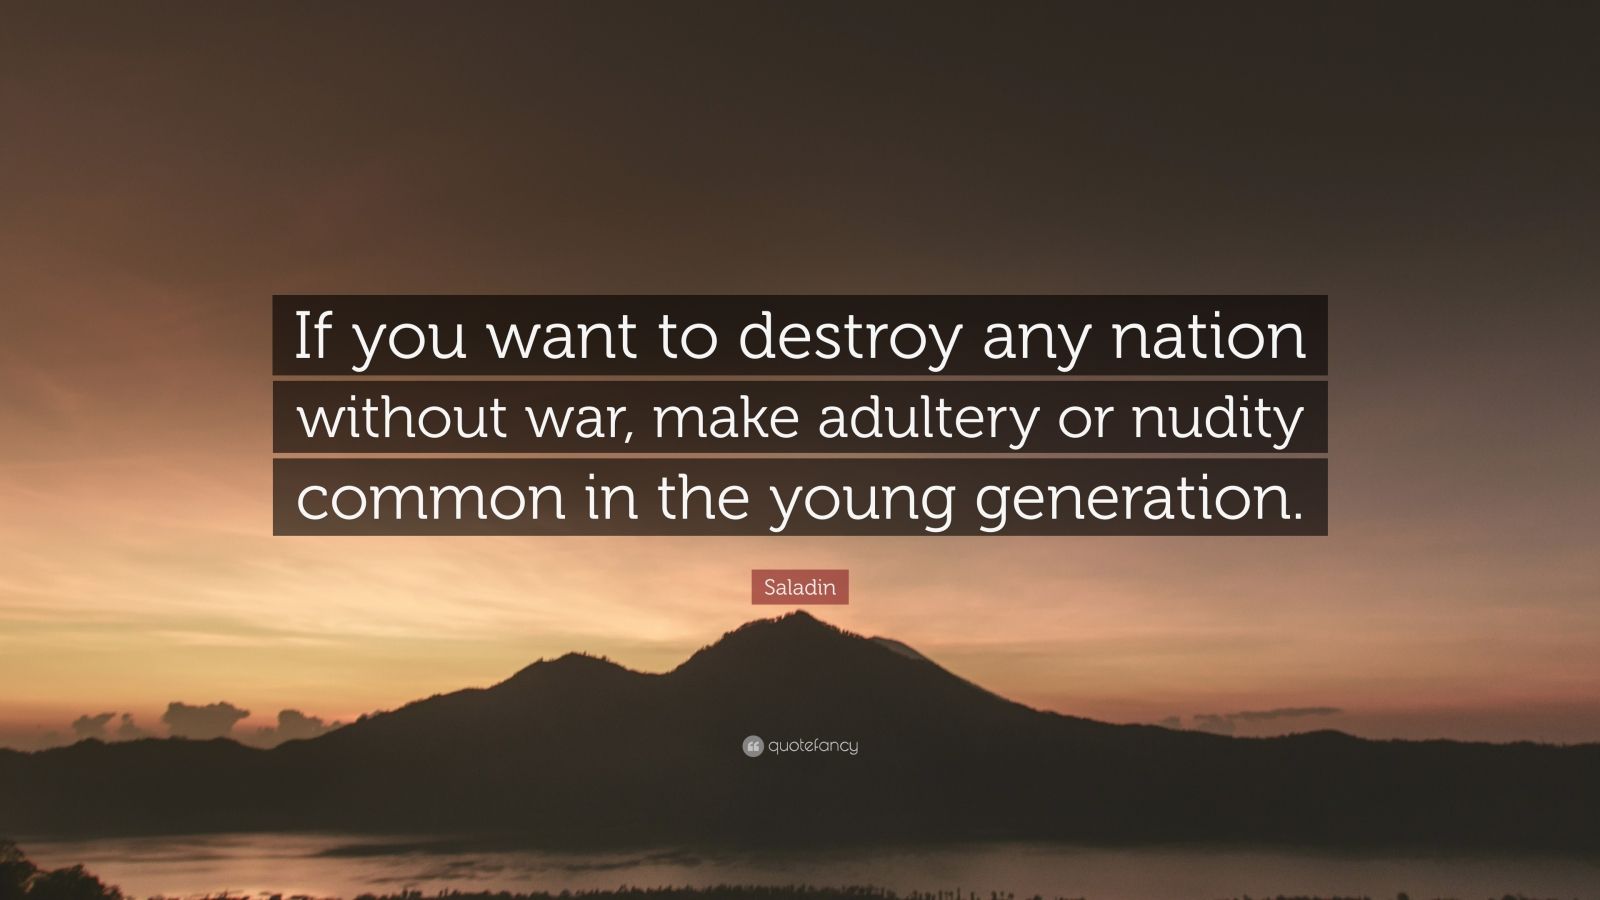 Saladin Quote: “If you want to destroy any nation without war, make